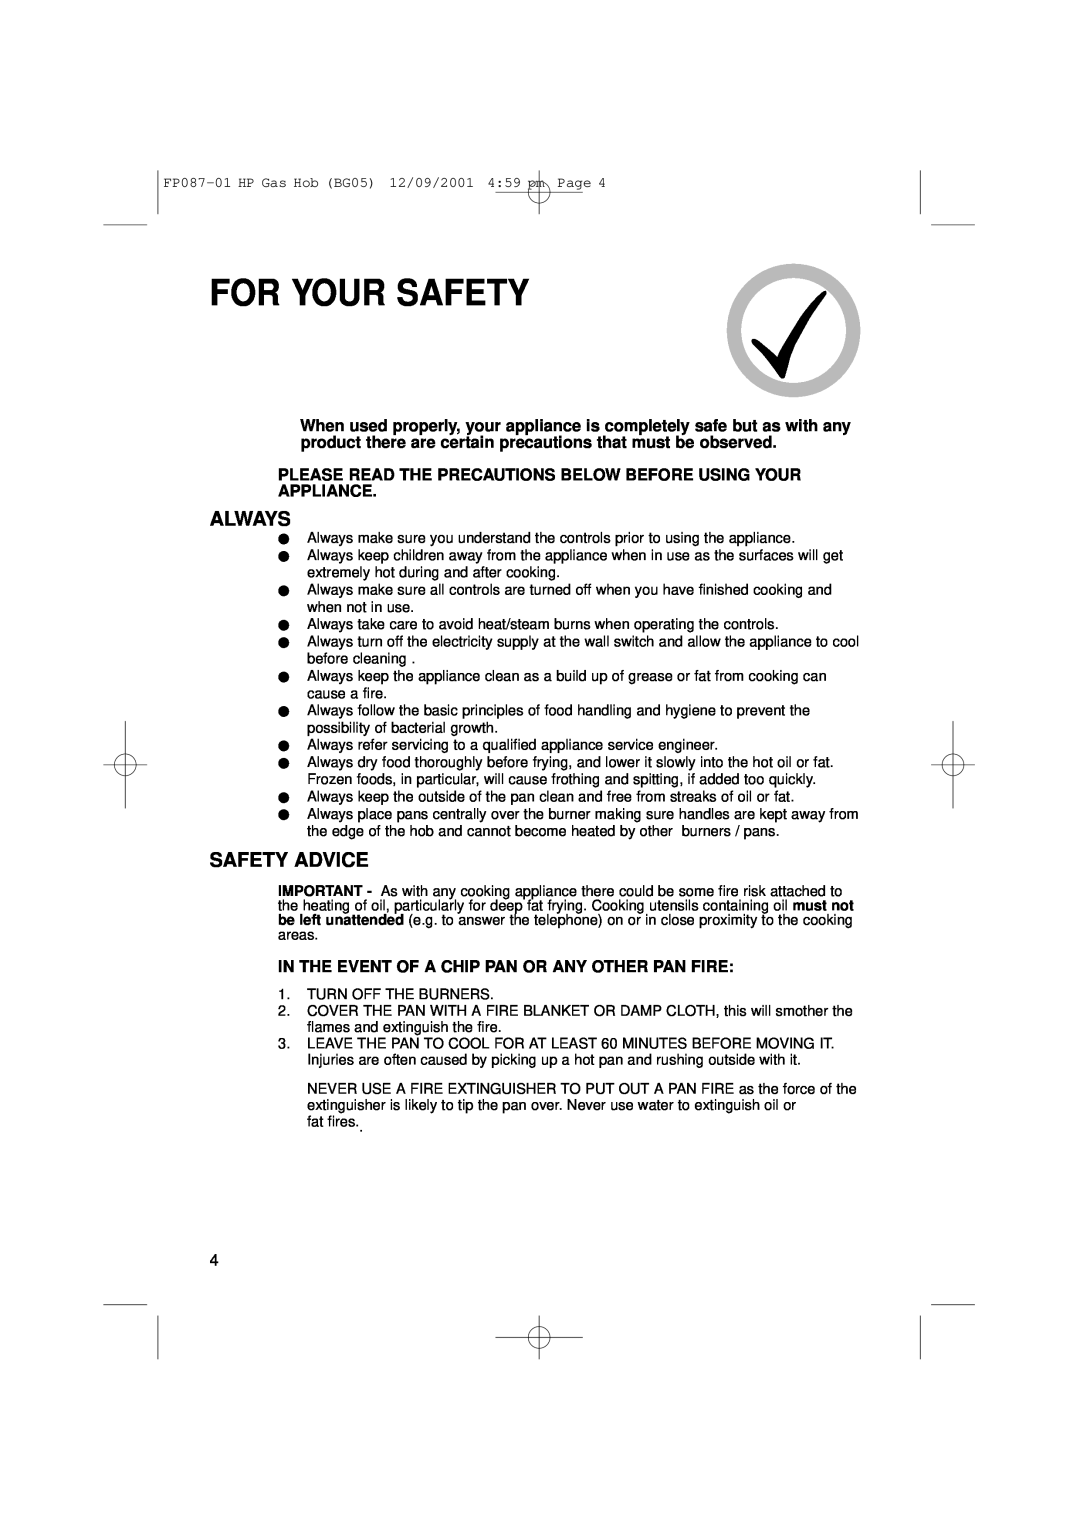 Hotpoint BG05 manual For Your Safety, Always, Safety Advice, Please Read The Precautions Below Before Using Your Appliance 